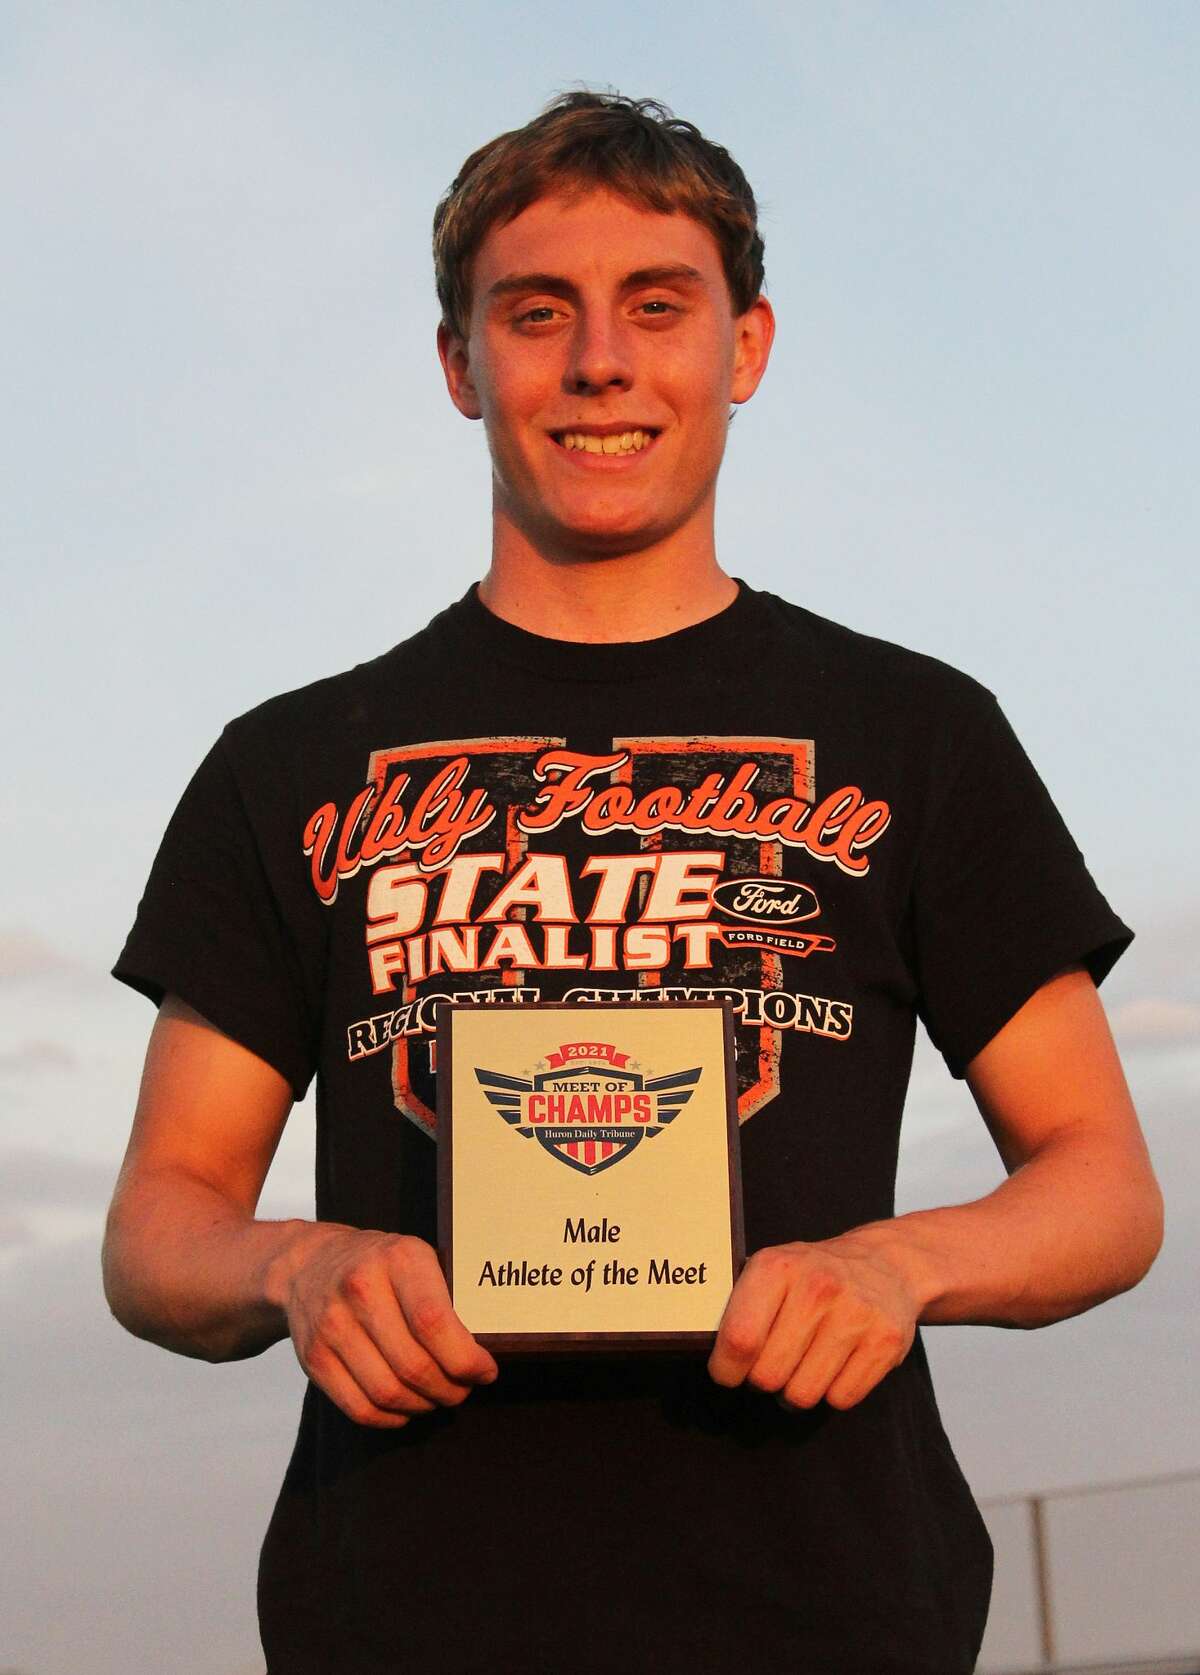 The annual Huron Daily Tribune Meet of Champs took place at Lee Kahler Track at Bad Axe High School on Tuesday. The meet was held for the first time since 2019 after being canceled due to the COVID-19 pandemic in 2020. Cass City's Saylar Cuthrell was named Female Athlete of the Meet and Ubly's Levi Peruski and Cass City's Anthony Boscaglia were named co-Male Athletes of the Meet. Cuthrell finished first in the Girls 100 Meters and Girls 200 Meters and was part of the first-place 4X100 Girls Relay and third-place 4X200 Girls Relay. Peruski finished first in the Boys 110m Hurdles, Boys 300m Hurdles and was part of the second-place 4X100 and 4X400 Relays. Boscaglia, not pictured, placed first in the Boys 100 Meters, Boys 200 Meters, and was part of the first-place Boys 4X100 Relay and third-place Boys 4X200 Relay.